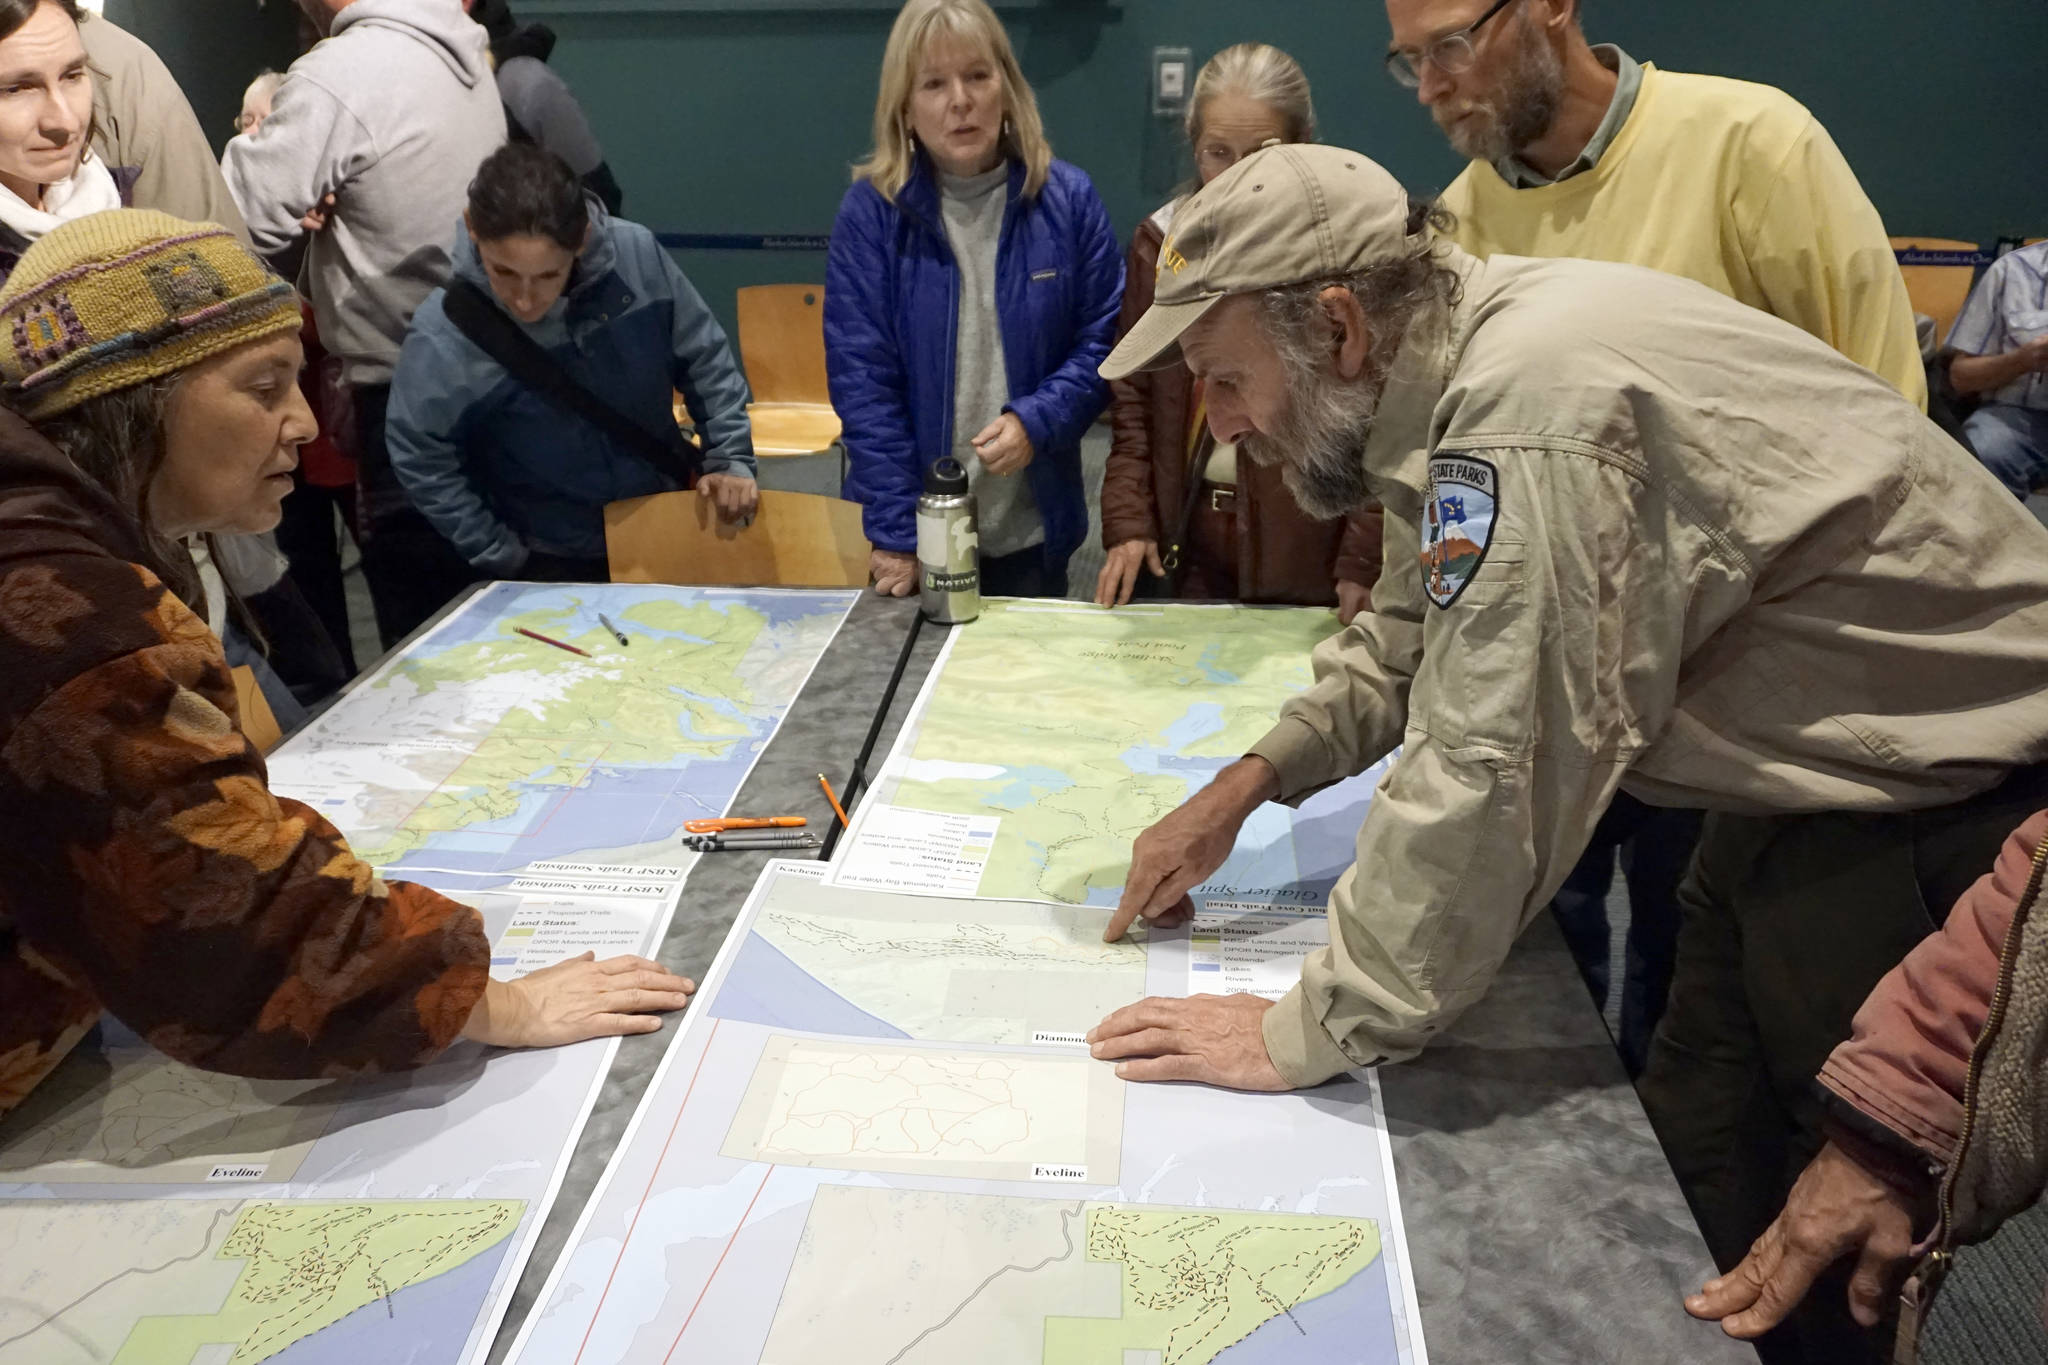 Laurie Daniel, left, and Alaska State Parks specialist Eric Clarke, right, discuss the Diamond Creek trails portion of the Kachemak Bay State Park and State Wilderness Park draft management plan at an open house on the plan on Oct. 29, 2018, at the Alaska Islands and Ocean Visitor Center in Homer, Alaska. (Photo by Michael Armstrong/Homer News)